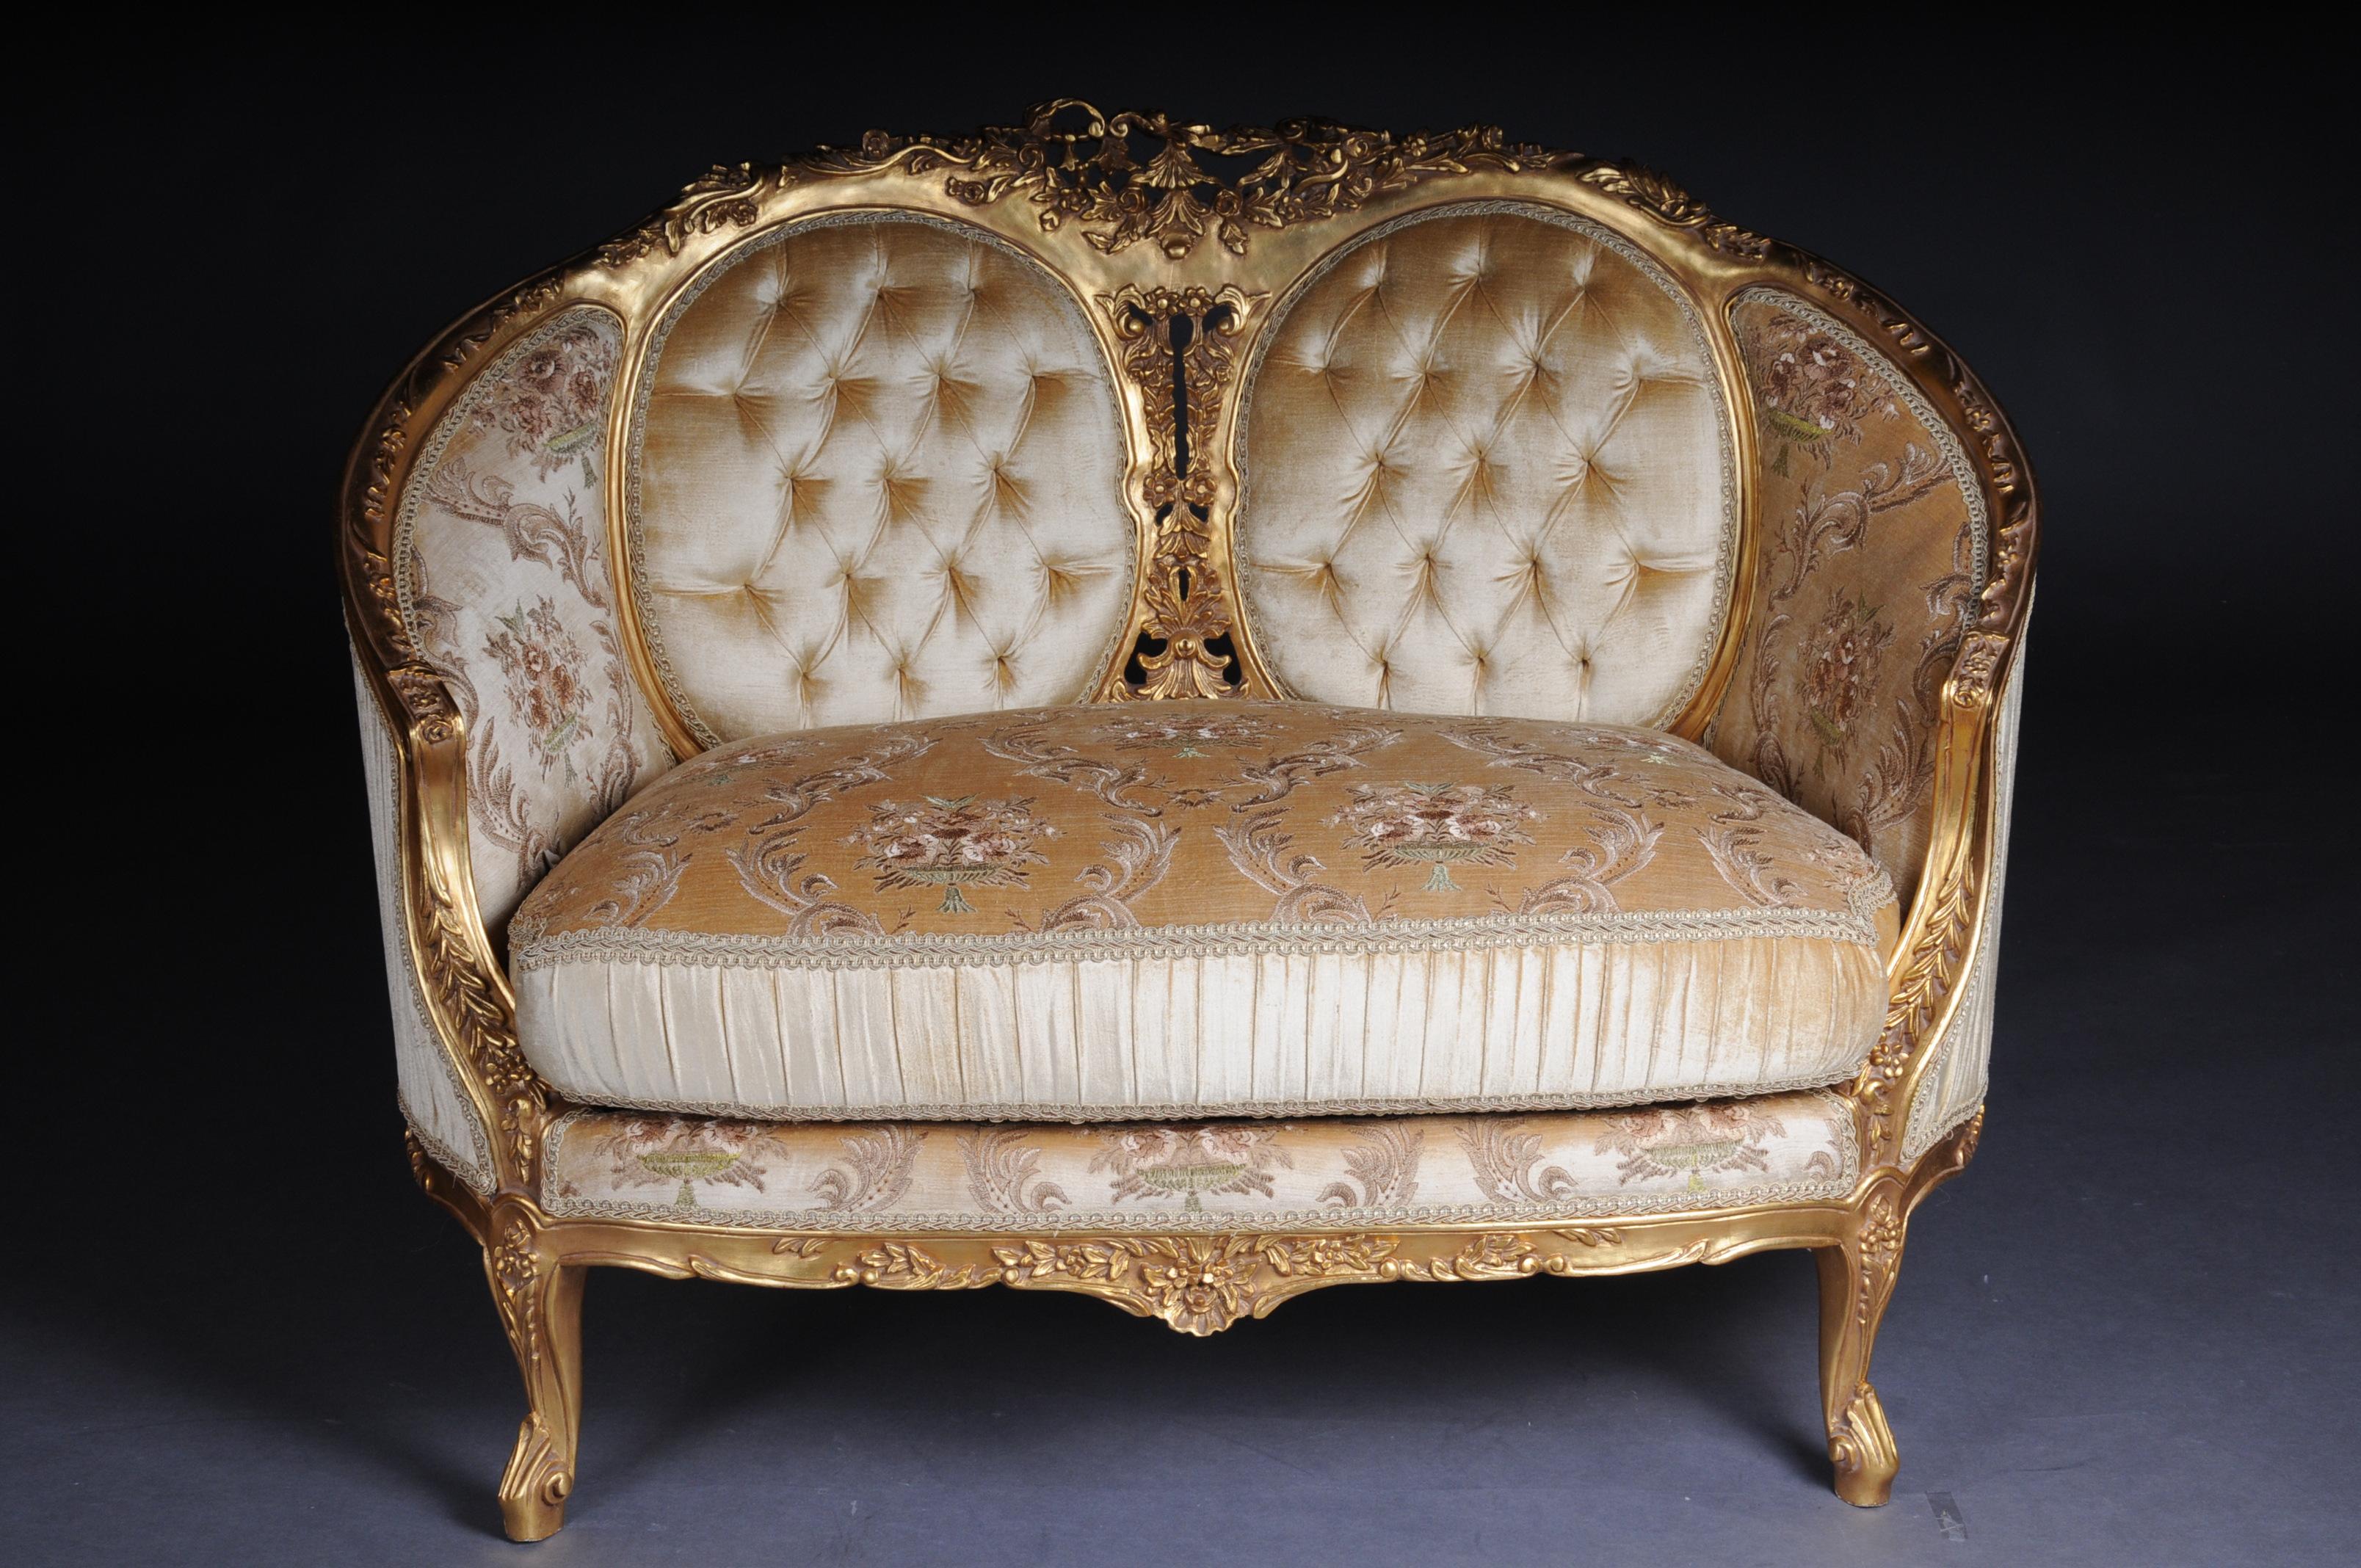 French Sofa, Canapé, Couch in Rococo or Louis XV Style (Französisch)